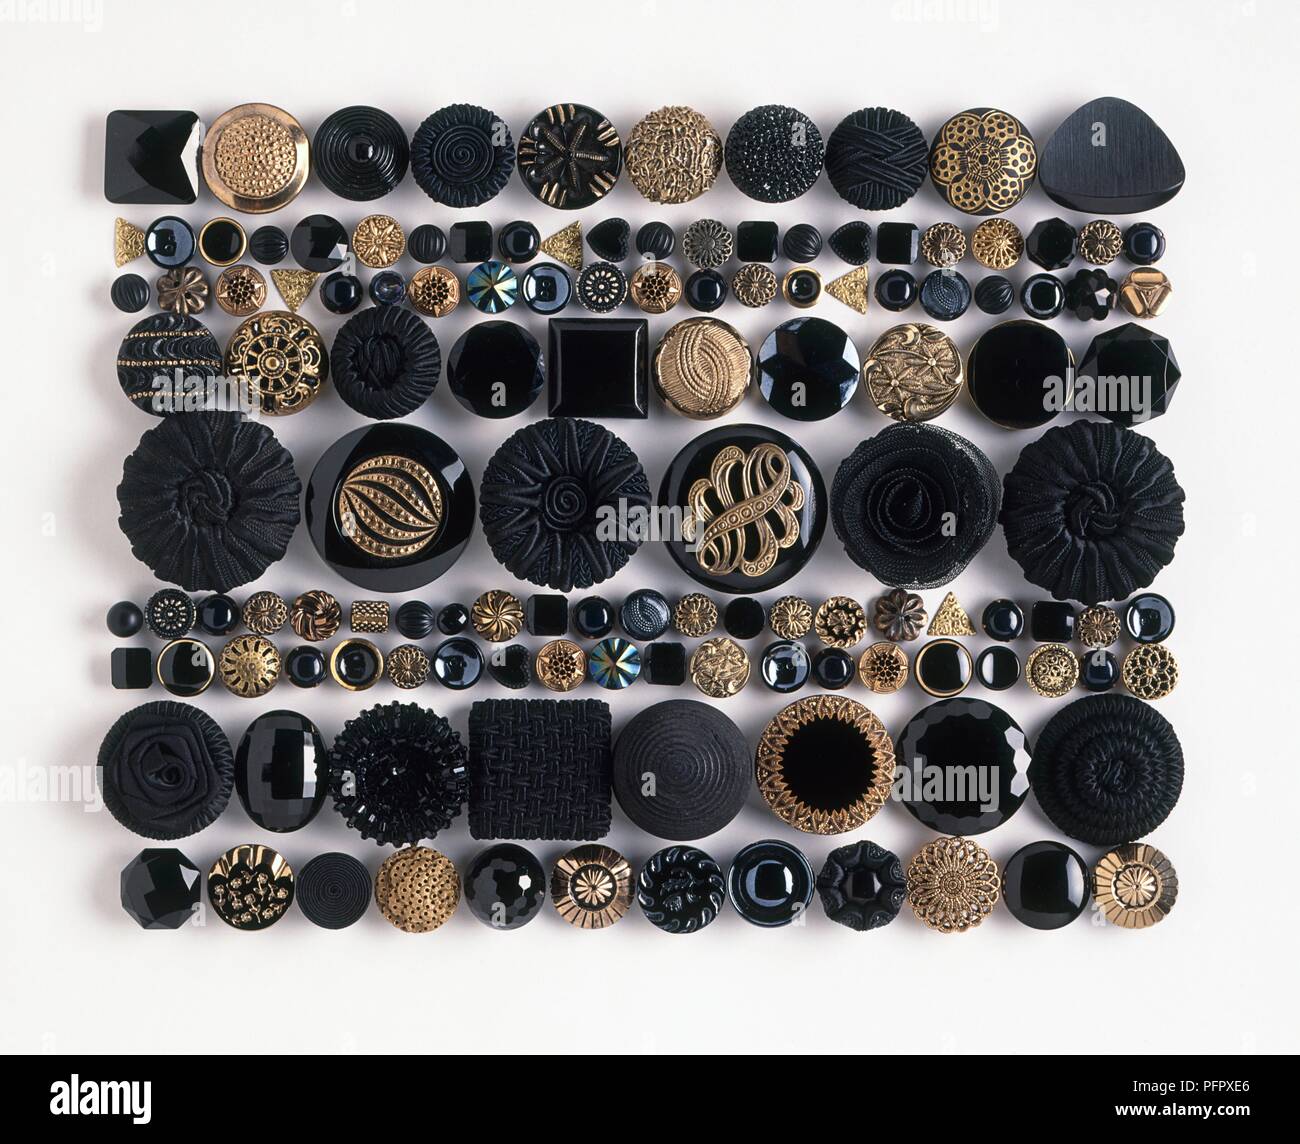 Ornate black and gold buttons of various shapes and sizes Stock Photo